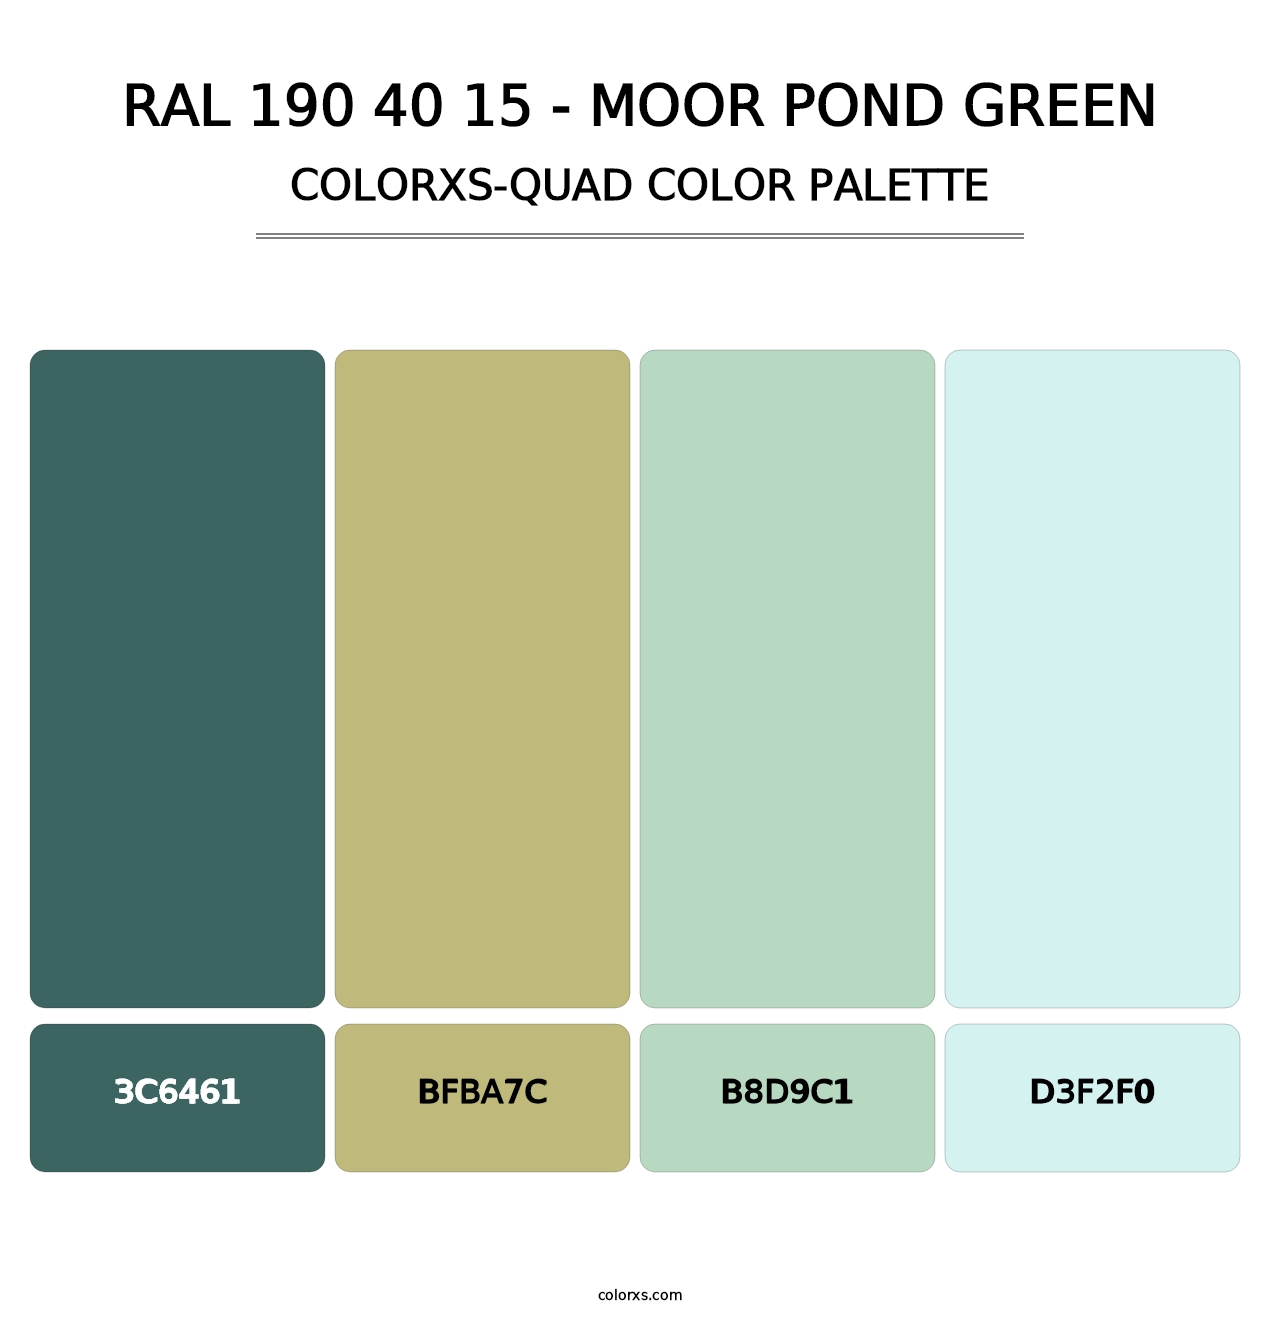 RAL 190 40 15 - Moor Pond Green - Colorxs Quad Palette